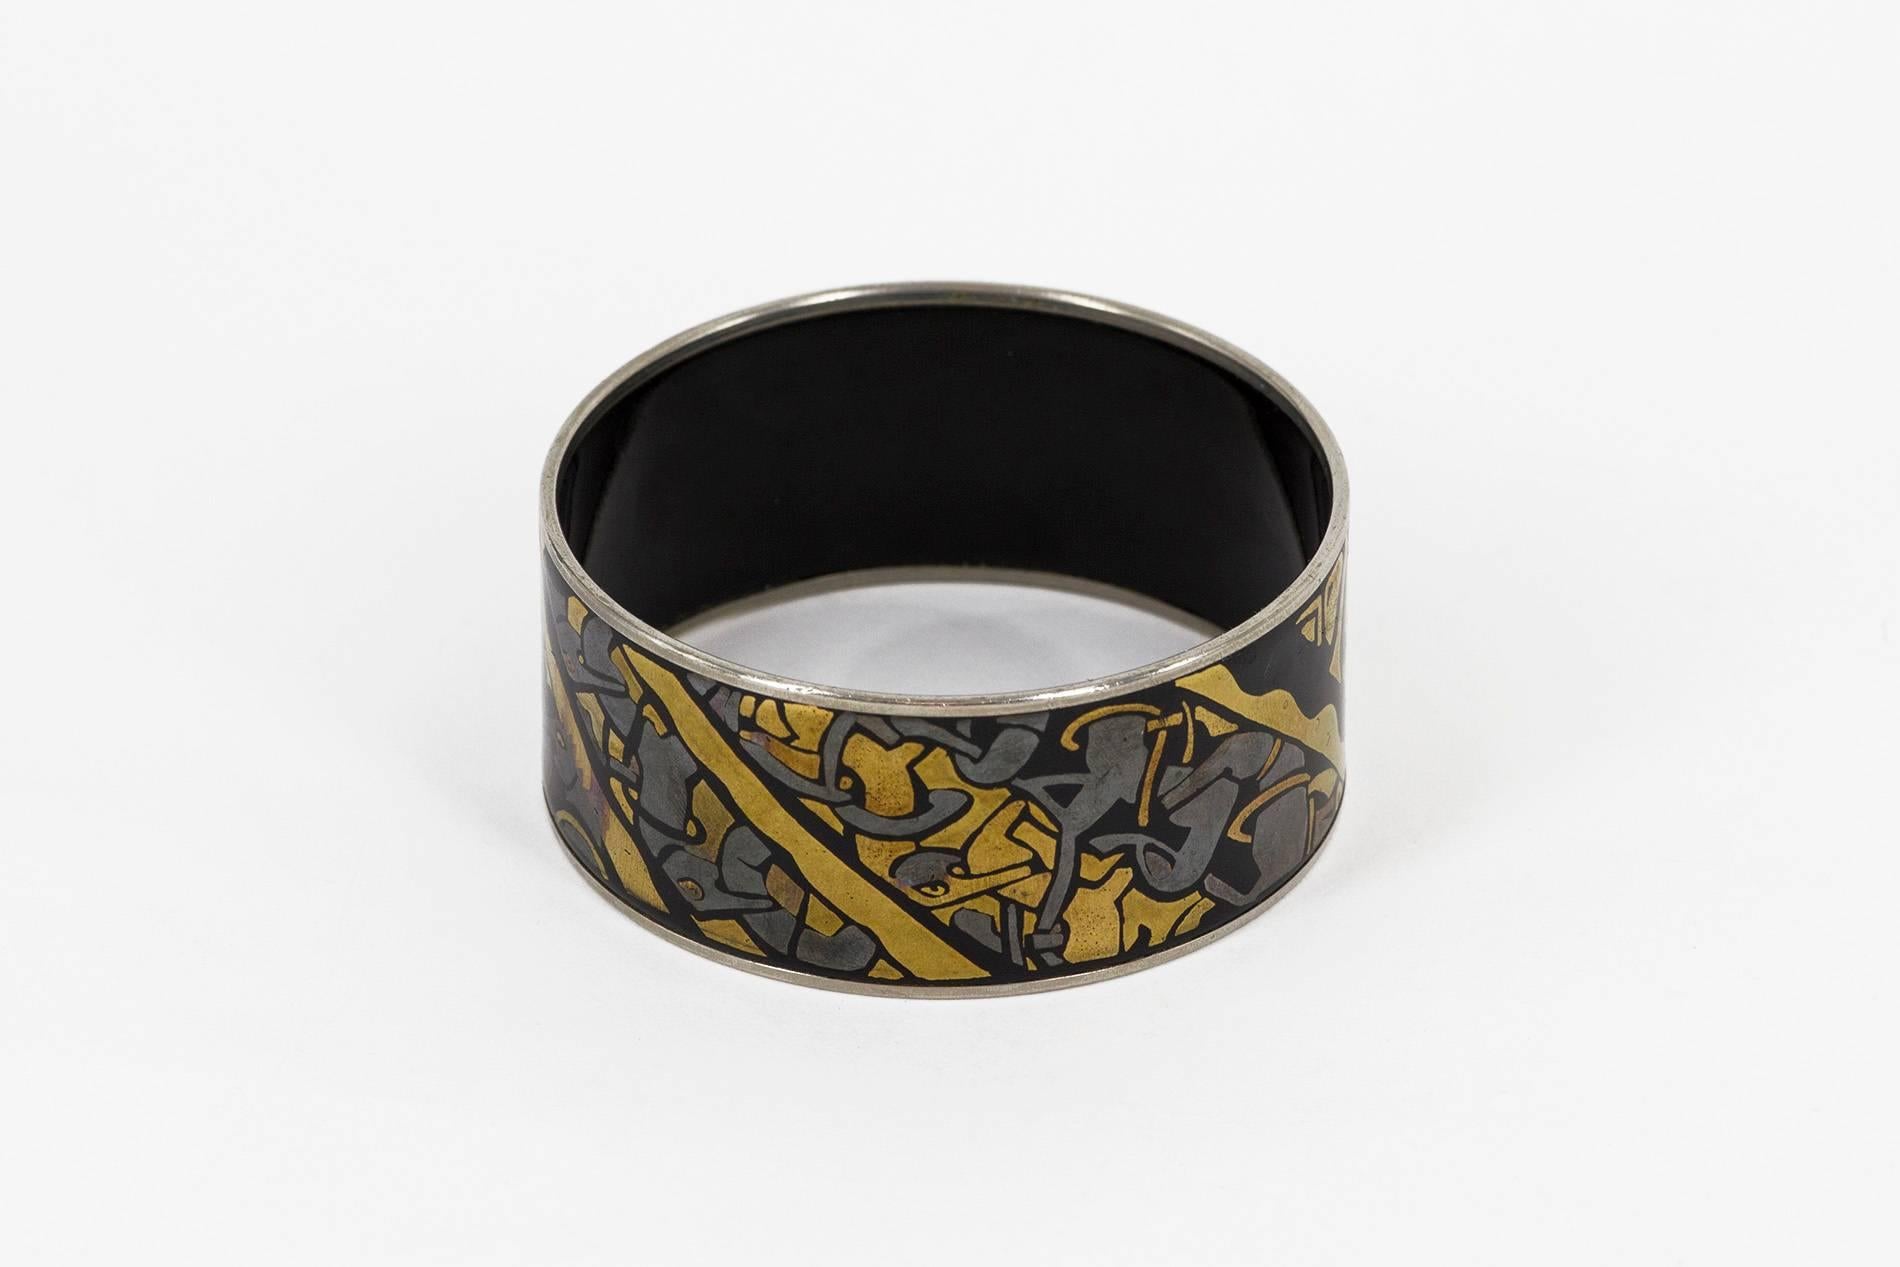 Enameled metal bracelet portraying abstract themes, hand made by Laurana, Pesaro in the 1990s. Signed.